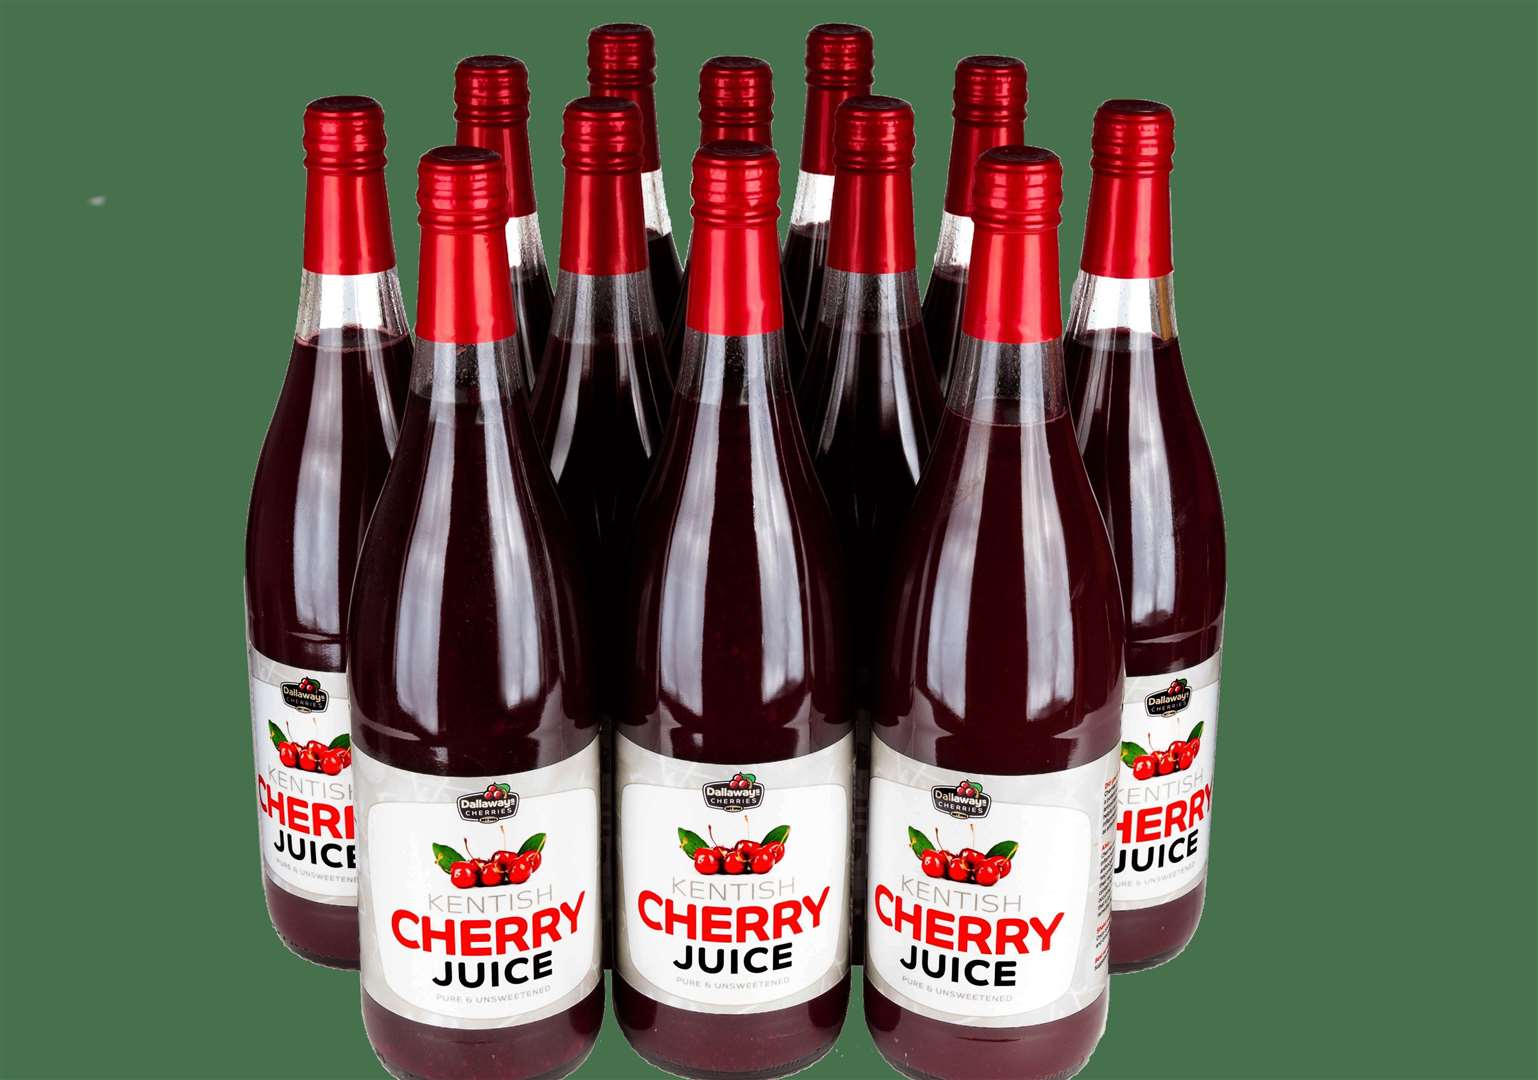 Would you consider serving Kentish Cherry Juice this Christmas?